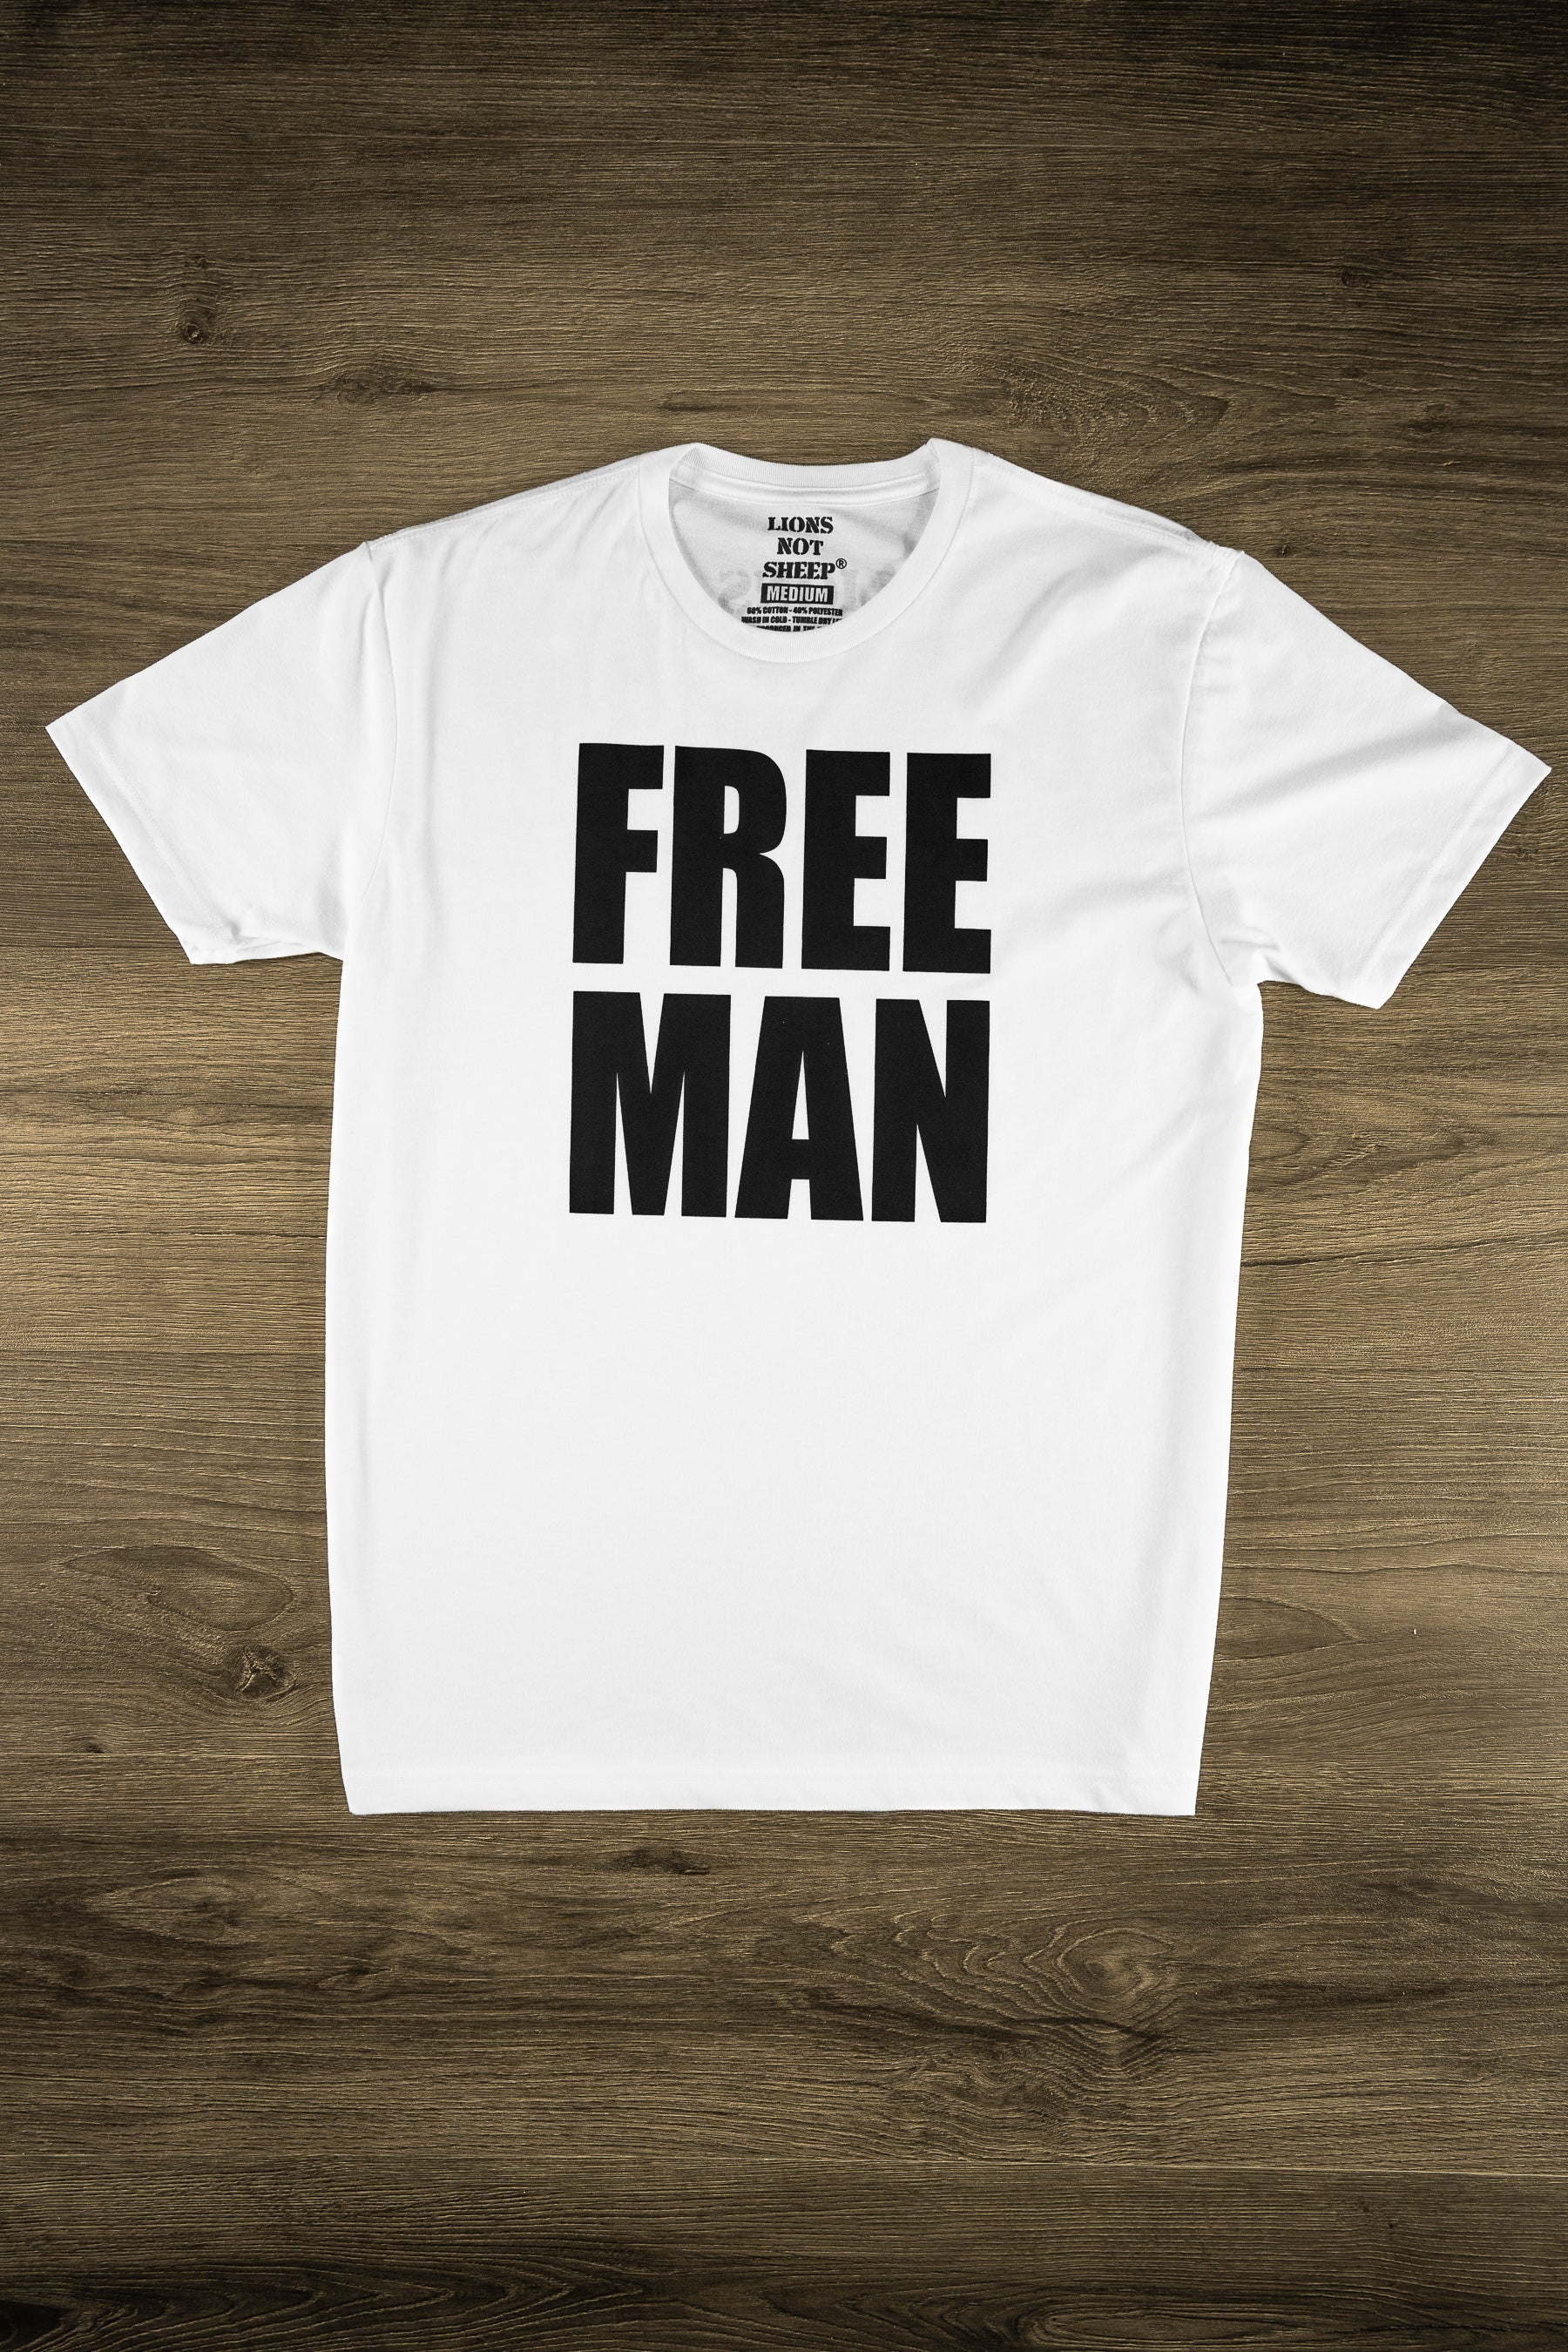 FREE MAN Tee (White Edition) - Lions Not Sheep ®